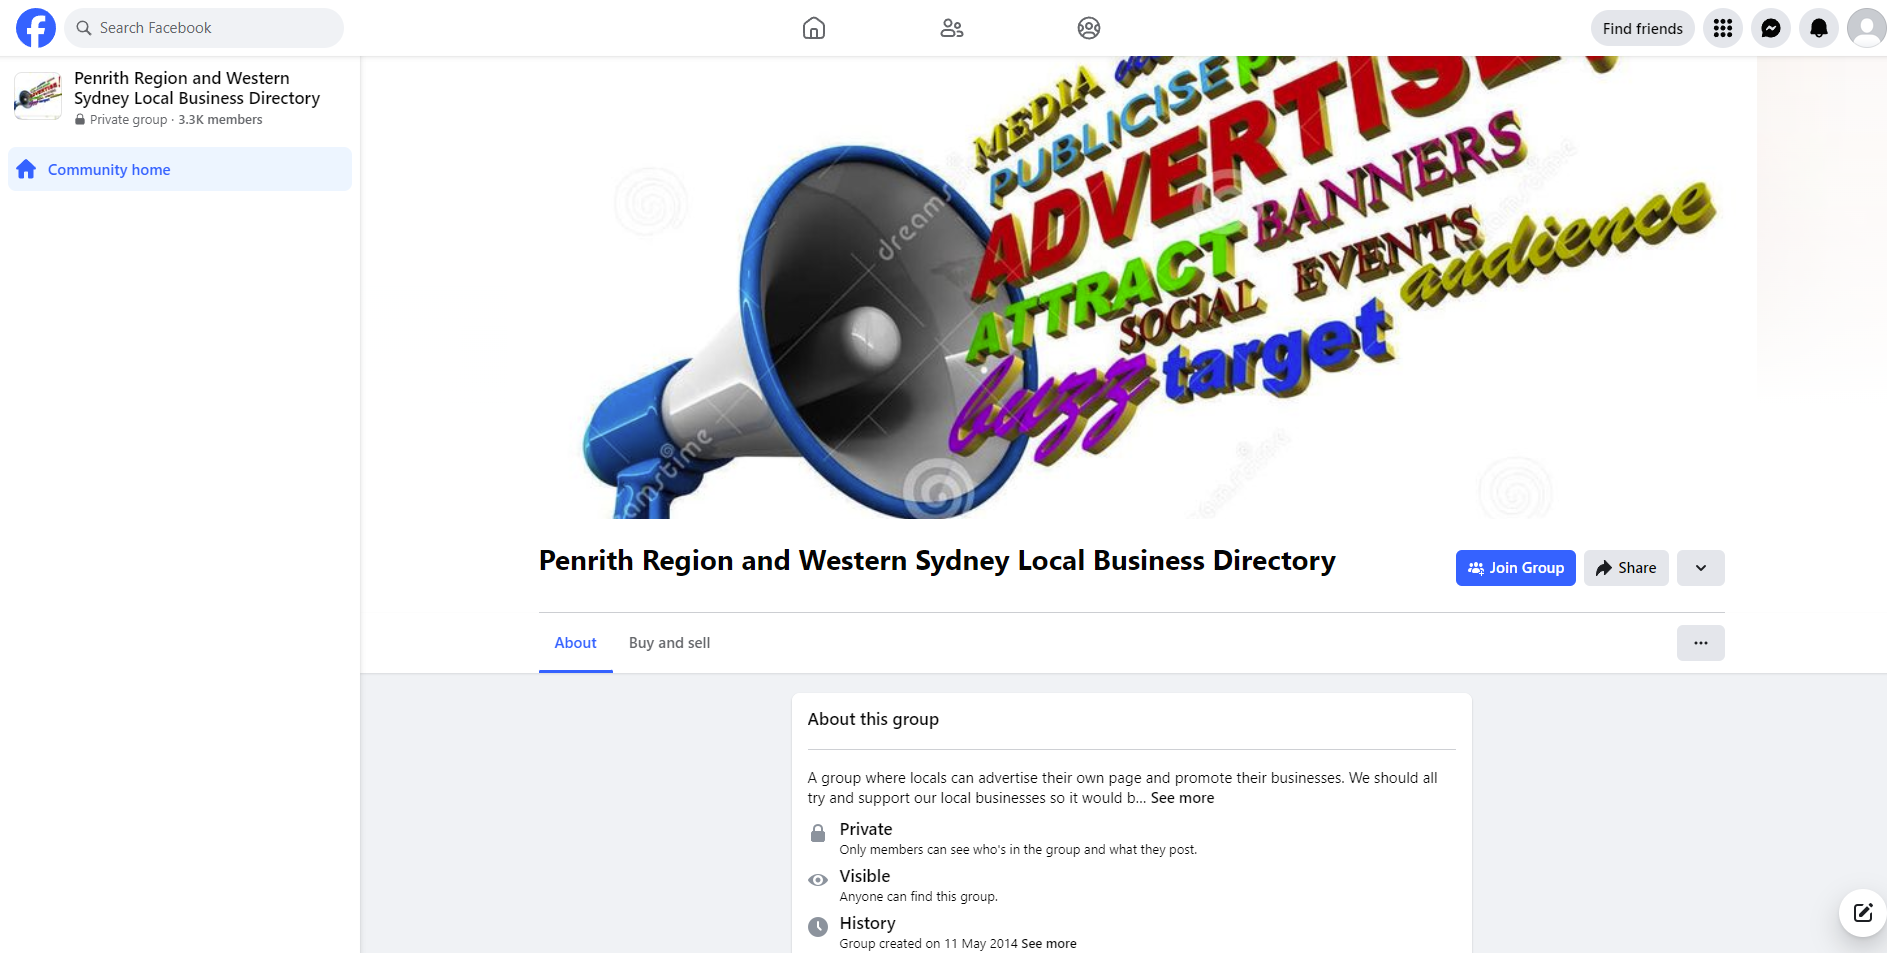 Penrith Region and Western Sydney Local Business Directory